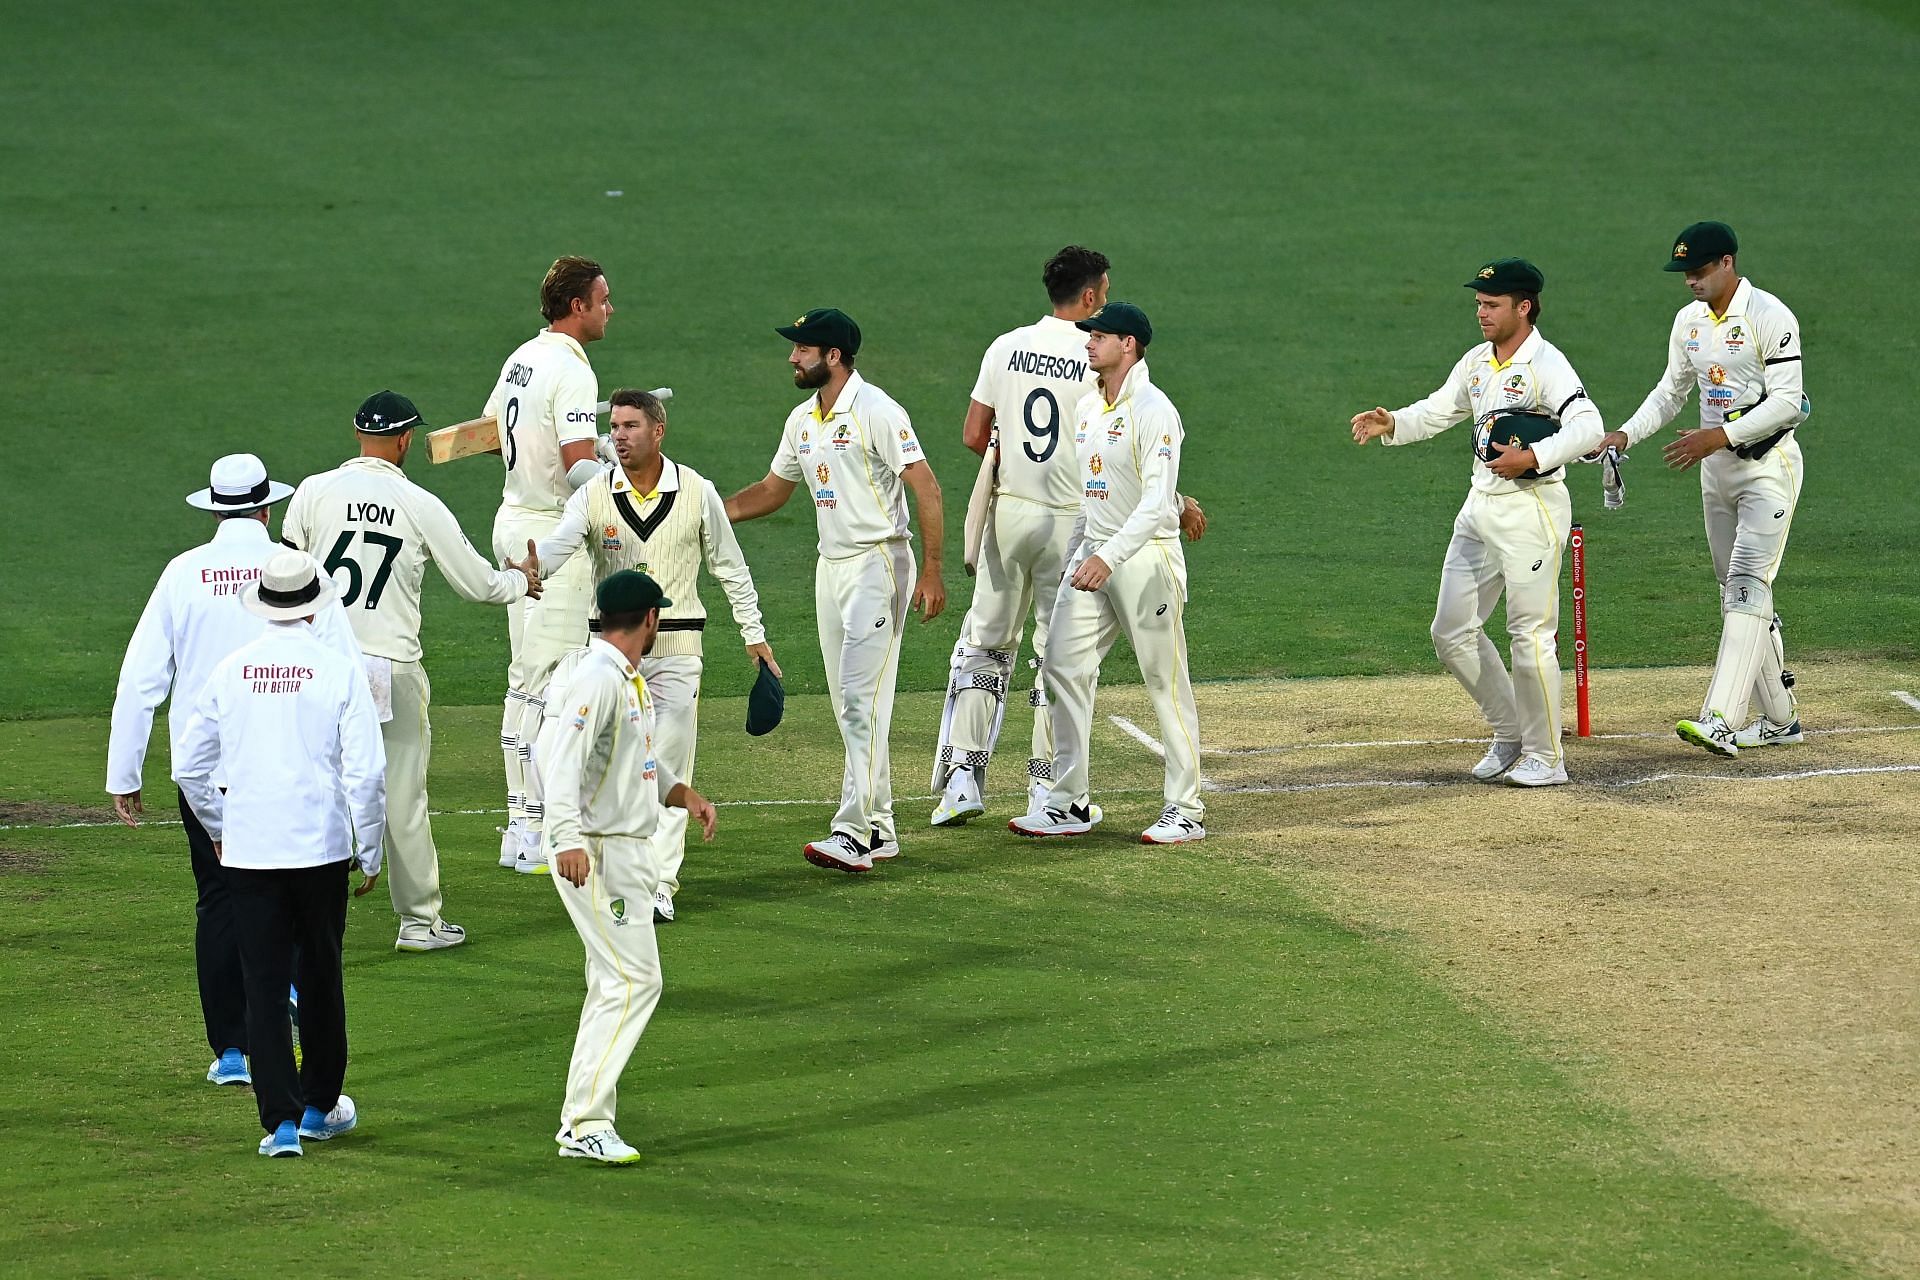 Ashes 2021- 2nd Test: Day 5: Australia beat England by 275 runs as the English batting lineup fails twice in the match.